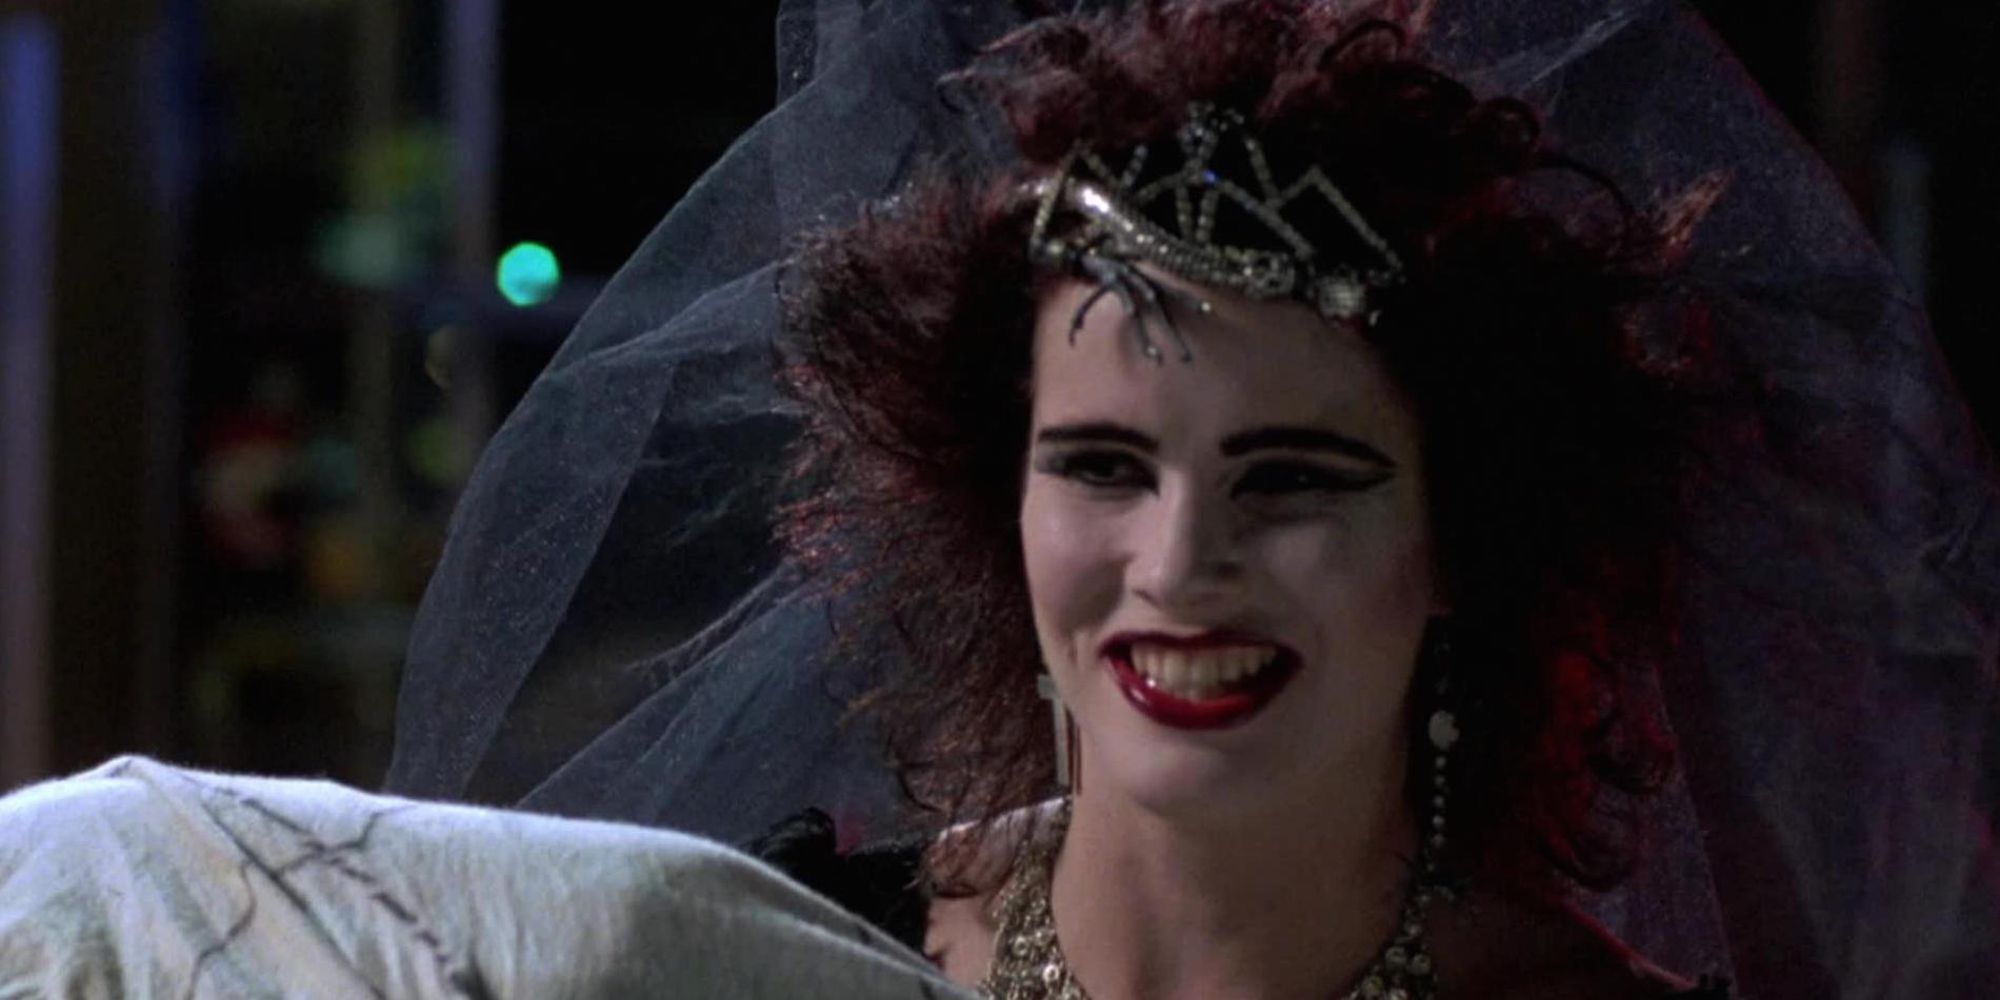 Which HalloweenThemed Movie Character Are You According To Your Zodiac Sign